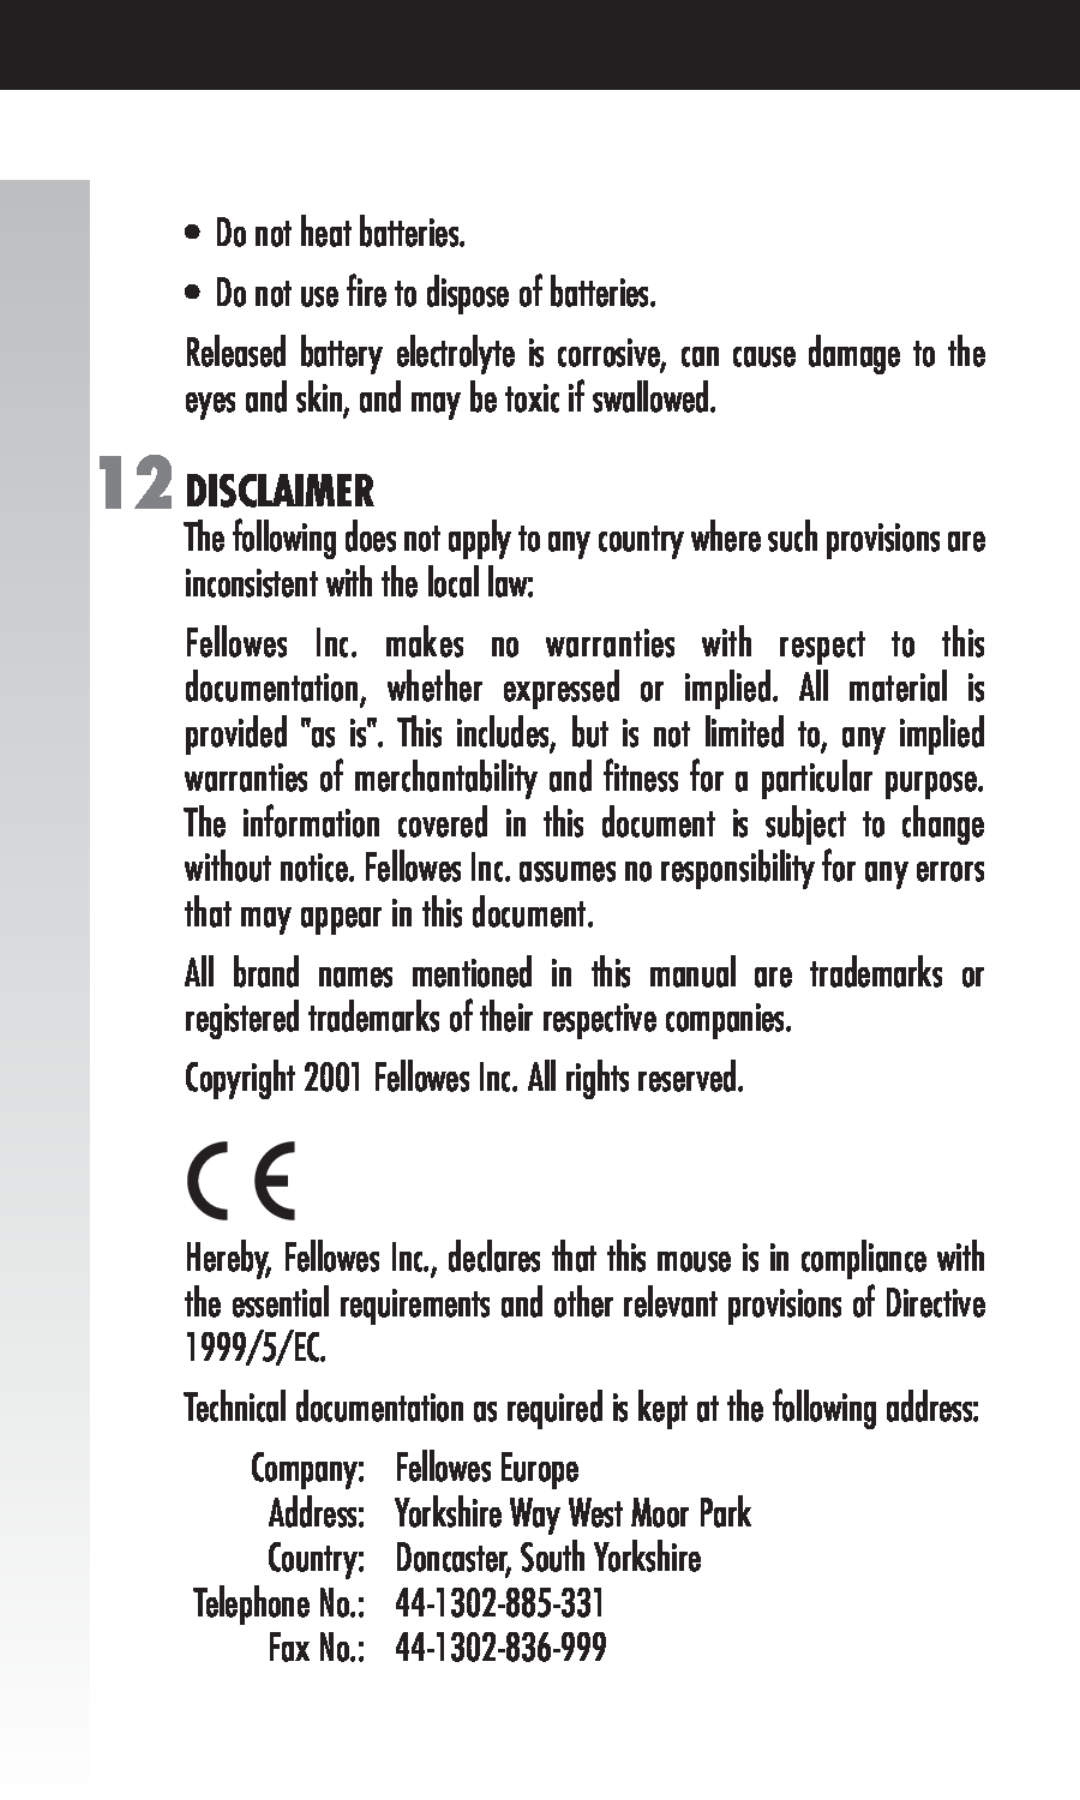 Fellowes Cordless Disclaimer, Do not heat batteries Do not use fire to dispose of batteries, Fellowes Europe, Address 